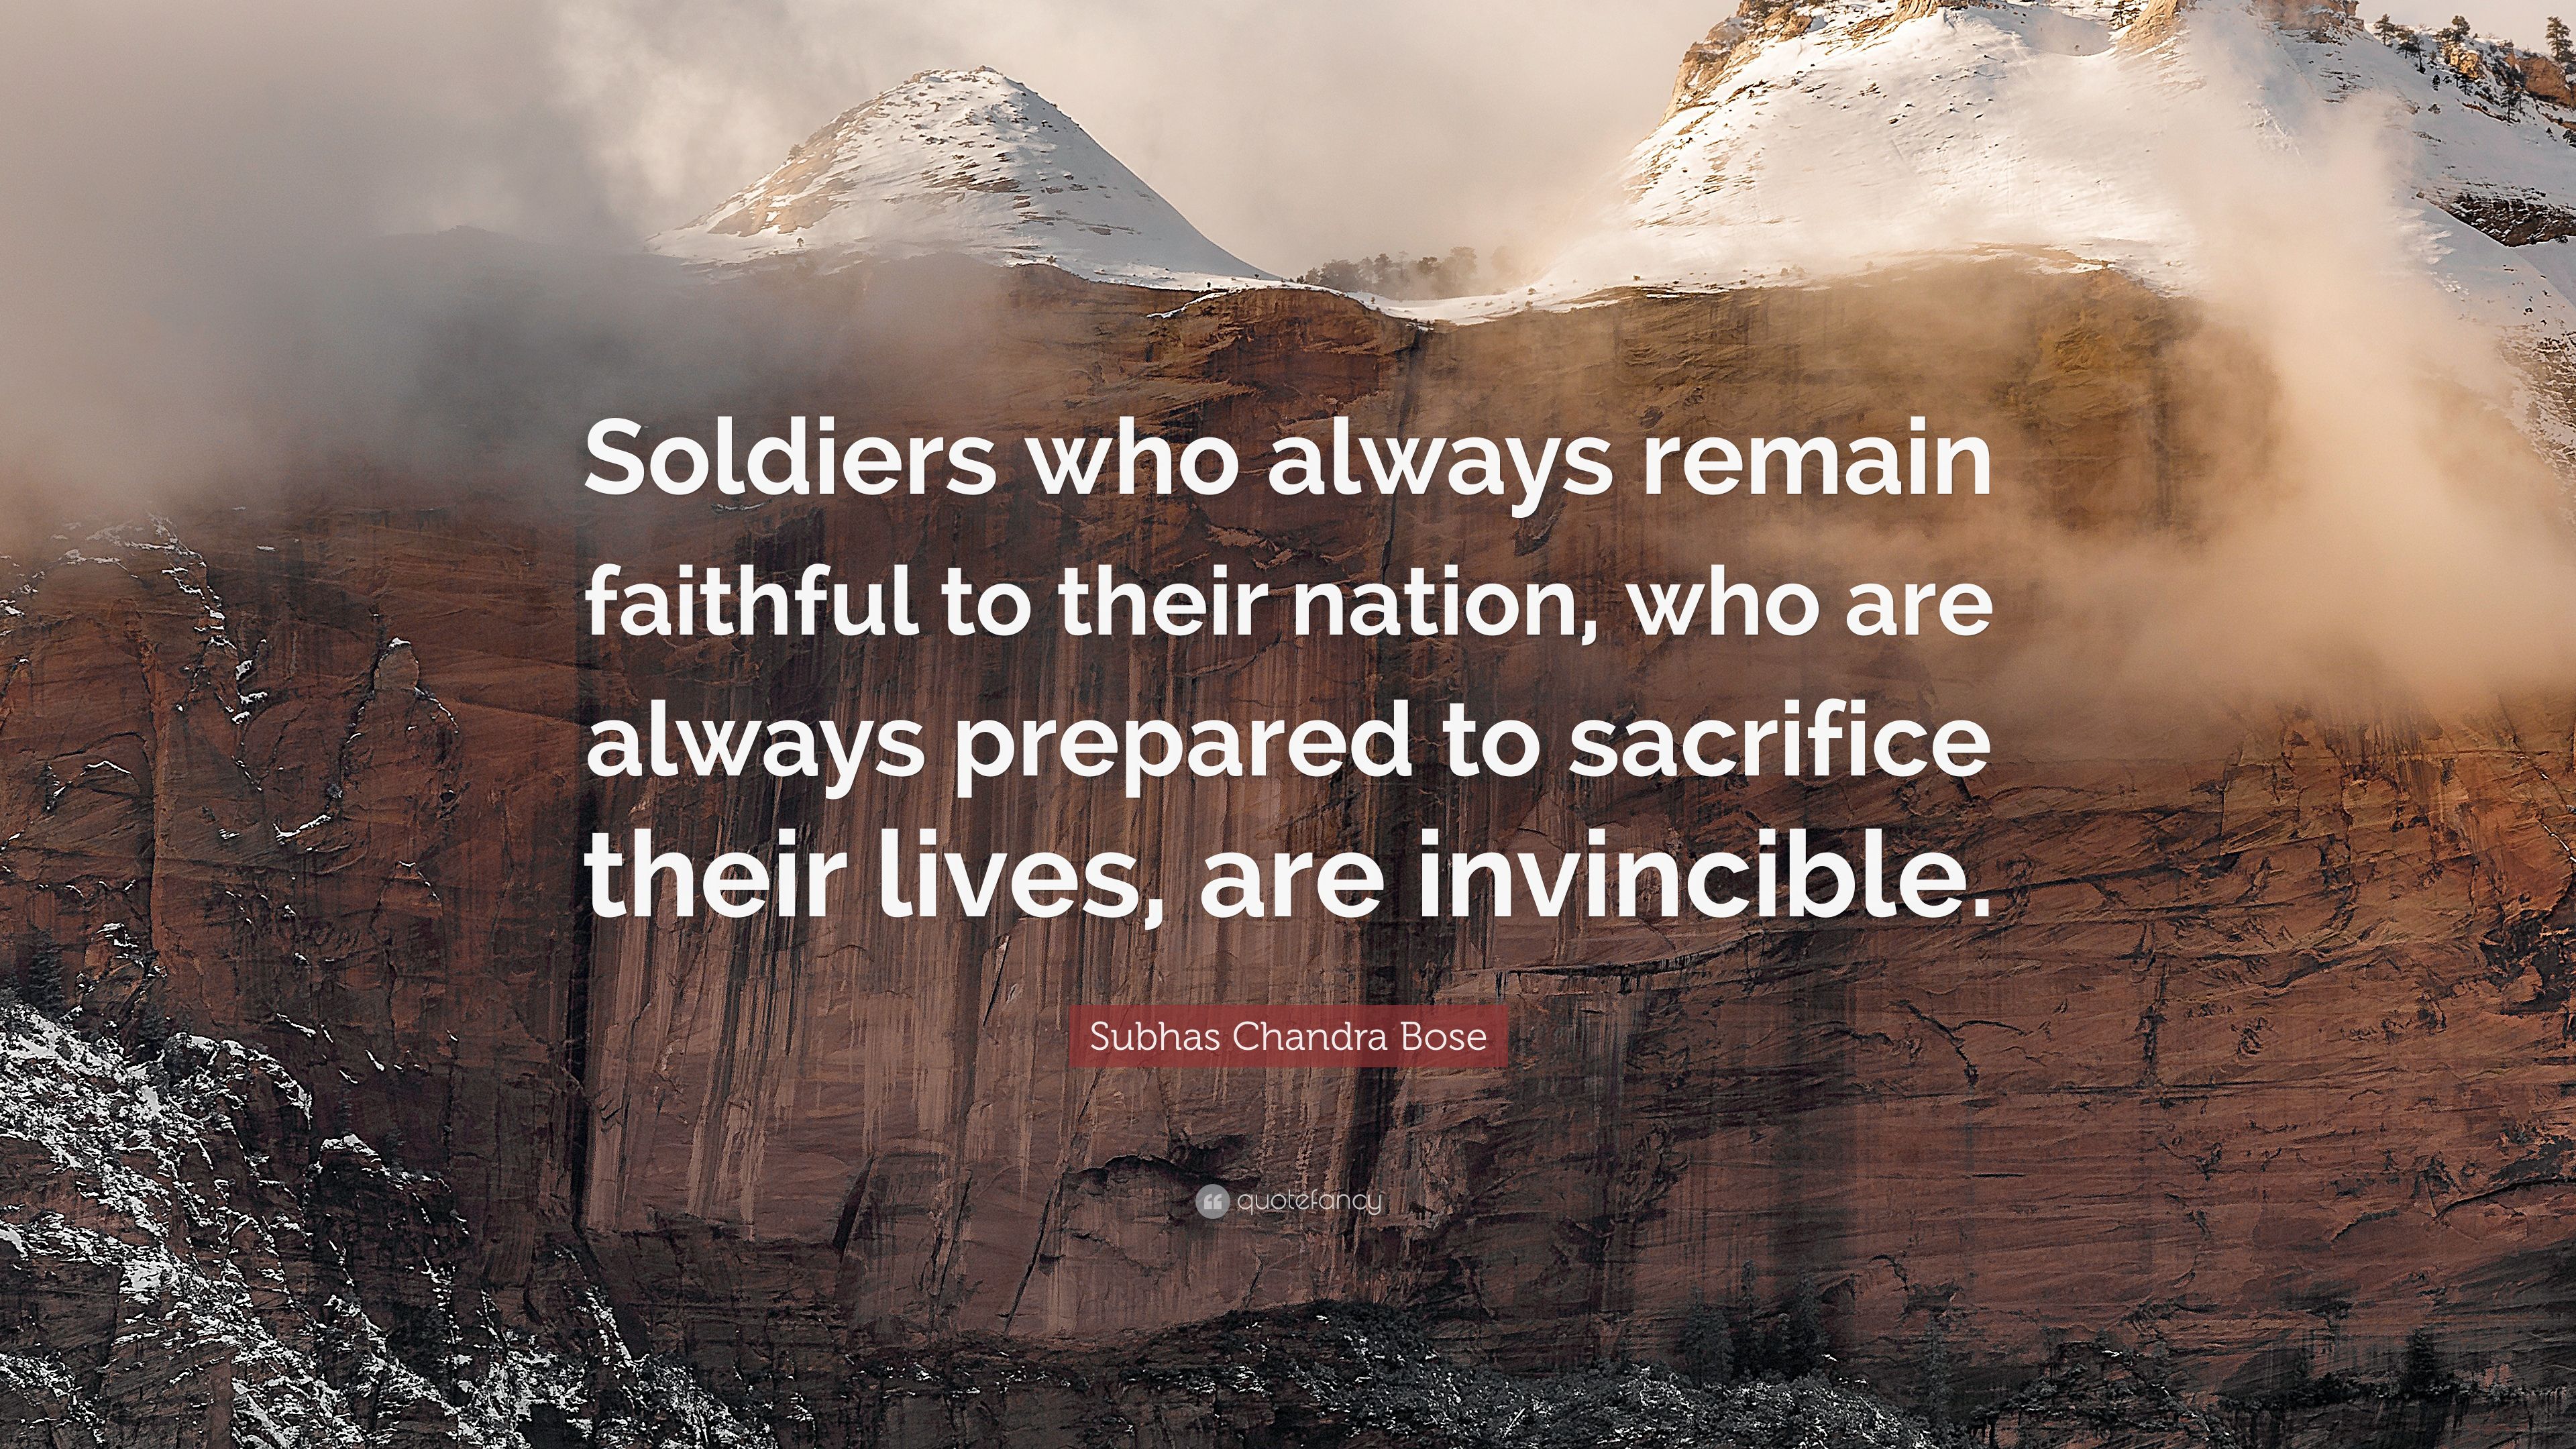 Subhas Chandra Bose Quote: “Soldiers who always remain faithful to